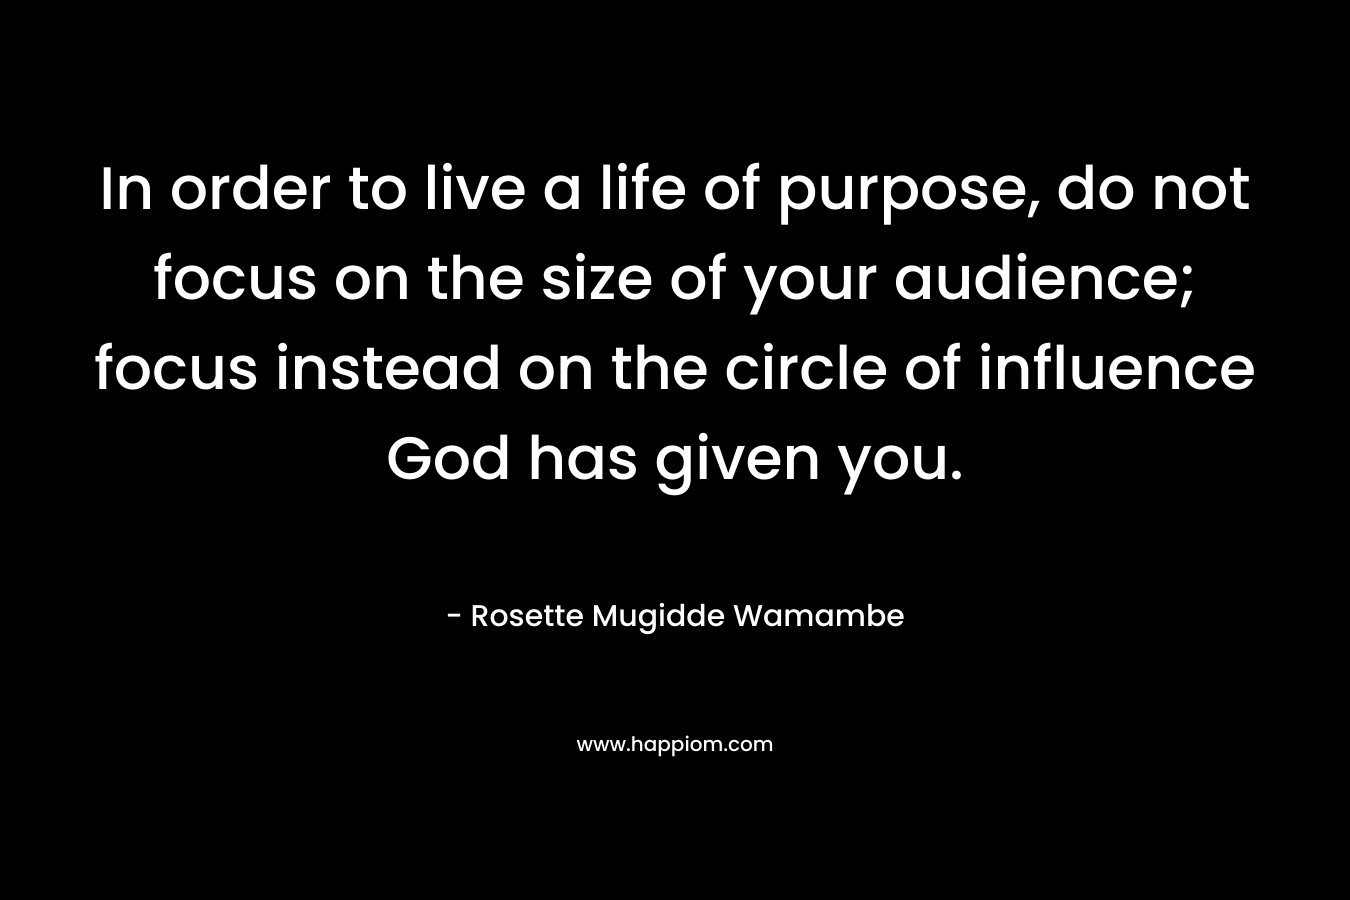 In order to live a life of purpose, do not focus on the size of your audience; focus instead on the circle of influence God has given you.